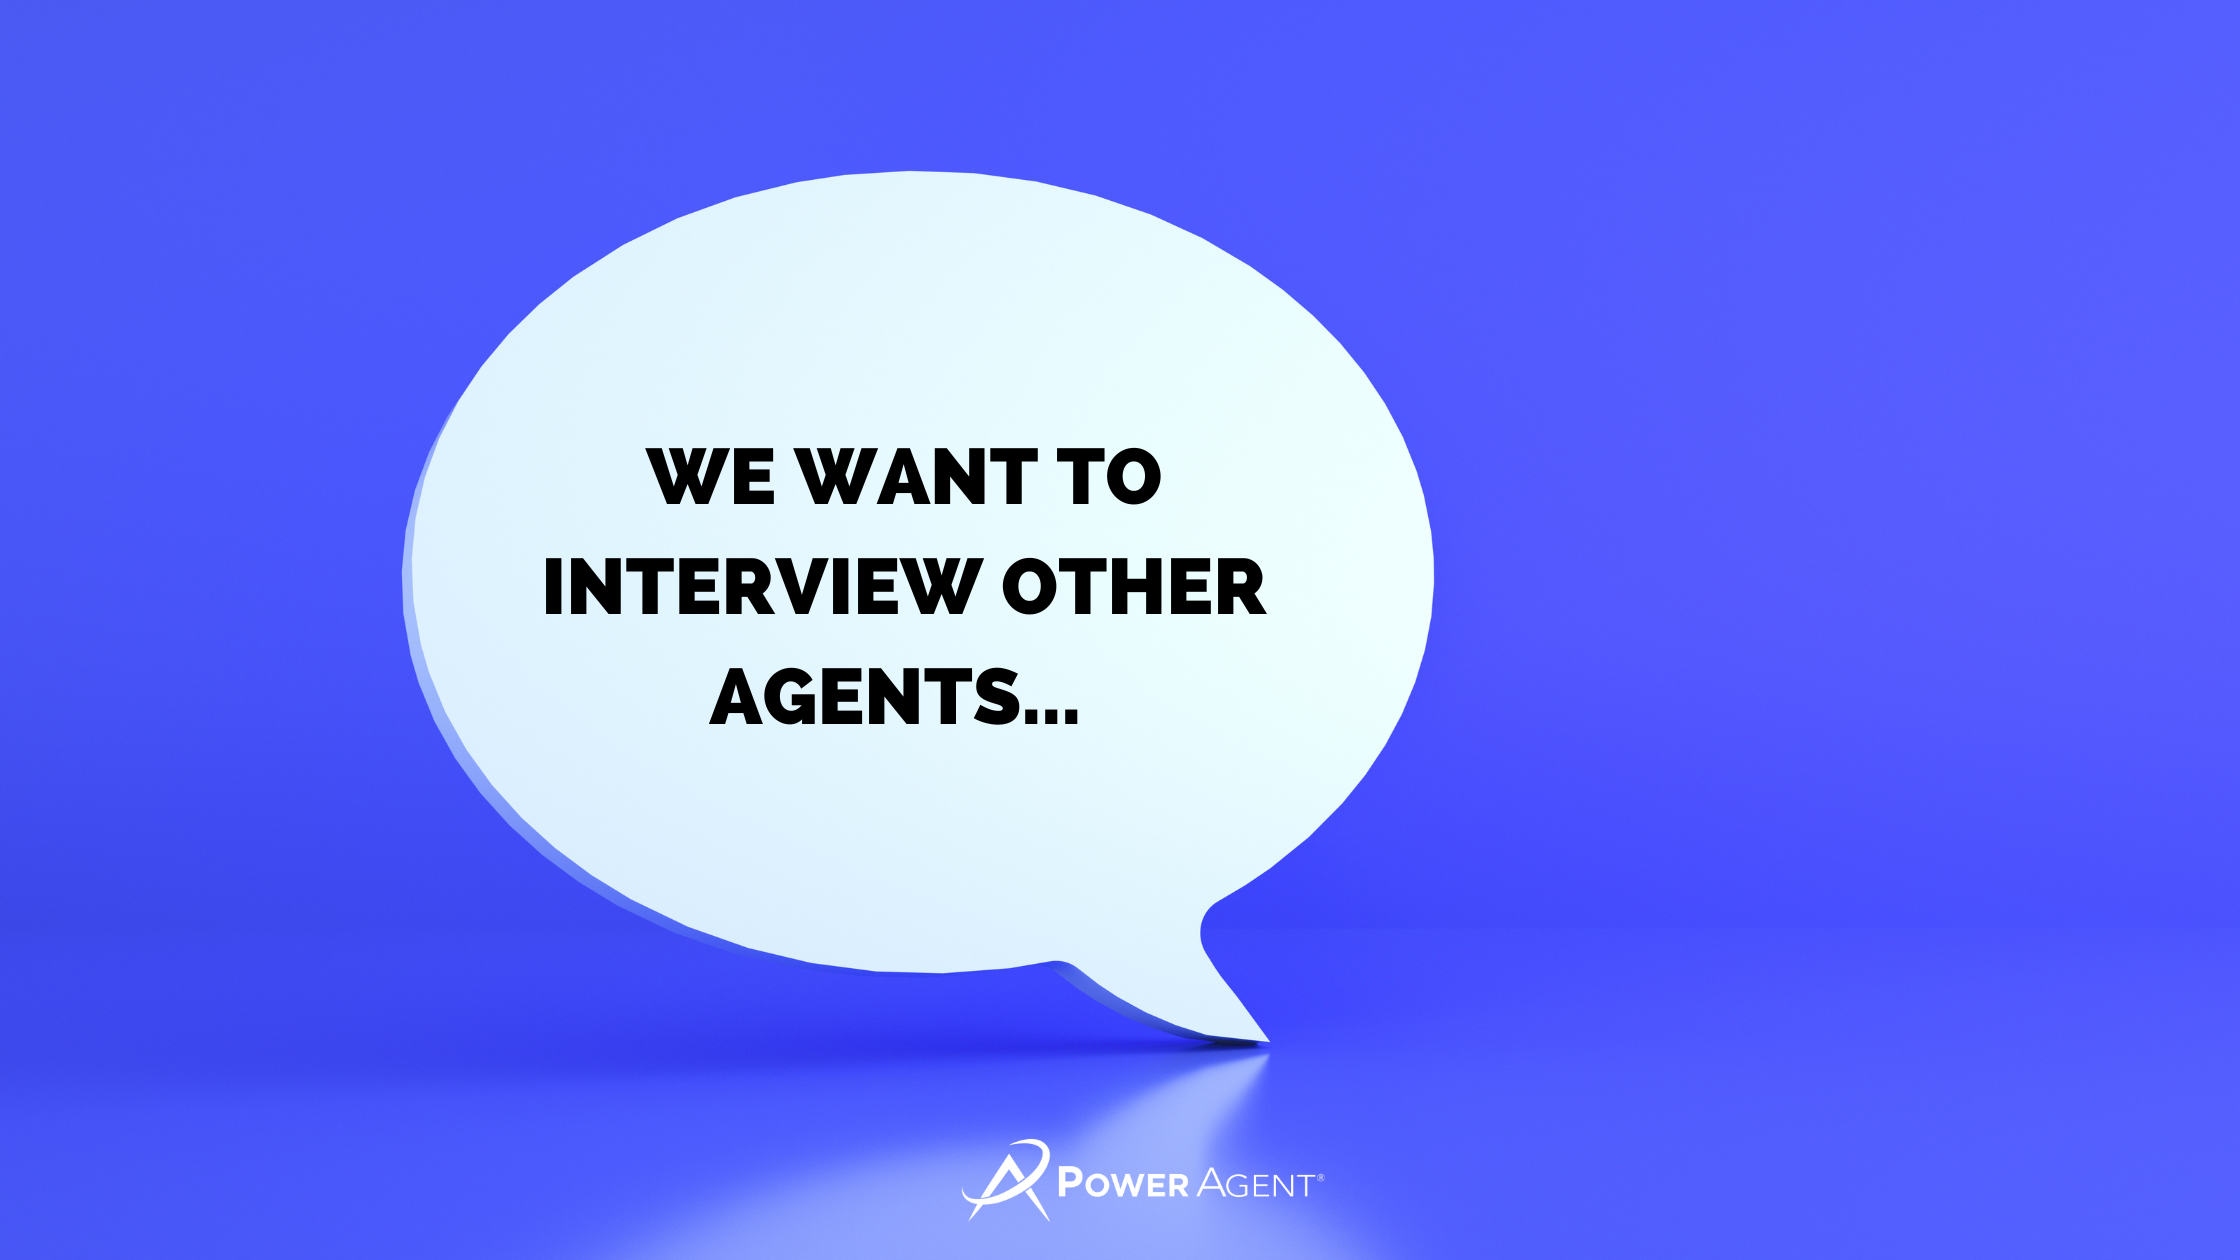 “I want to interview other agents” leaves most professionals scrambling for an answer to turn the listing conversation around...we've got you covered. 